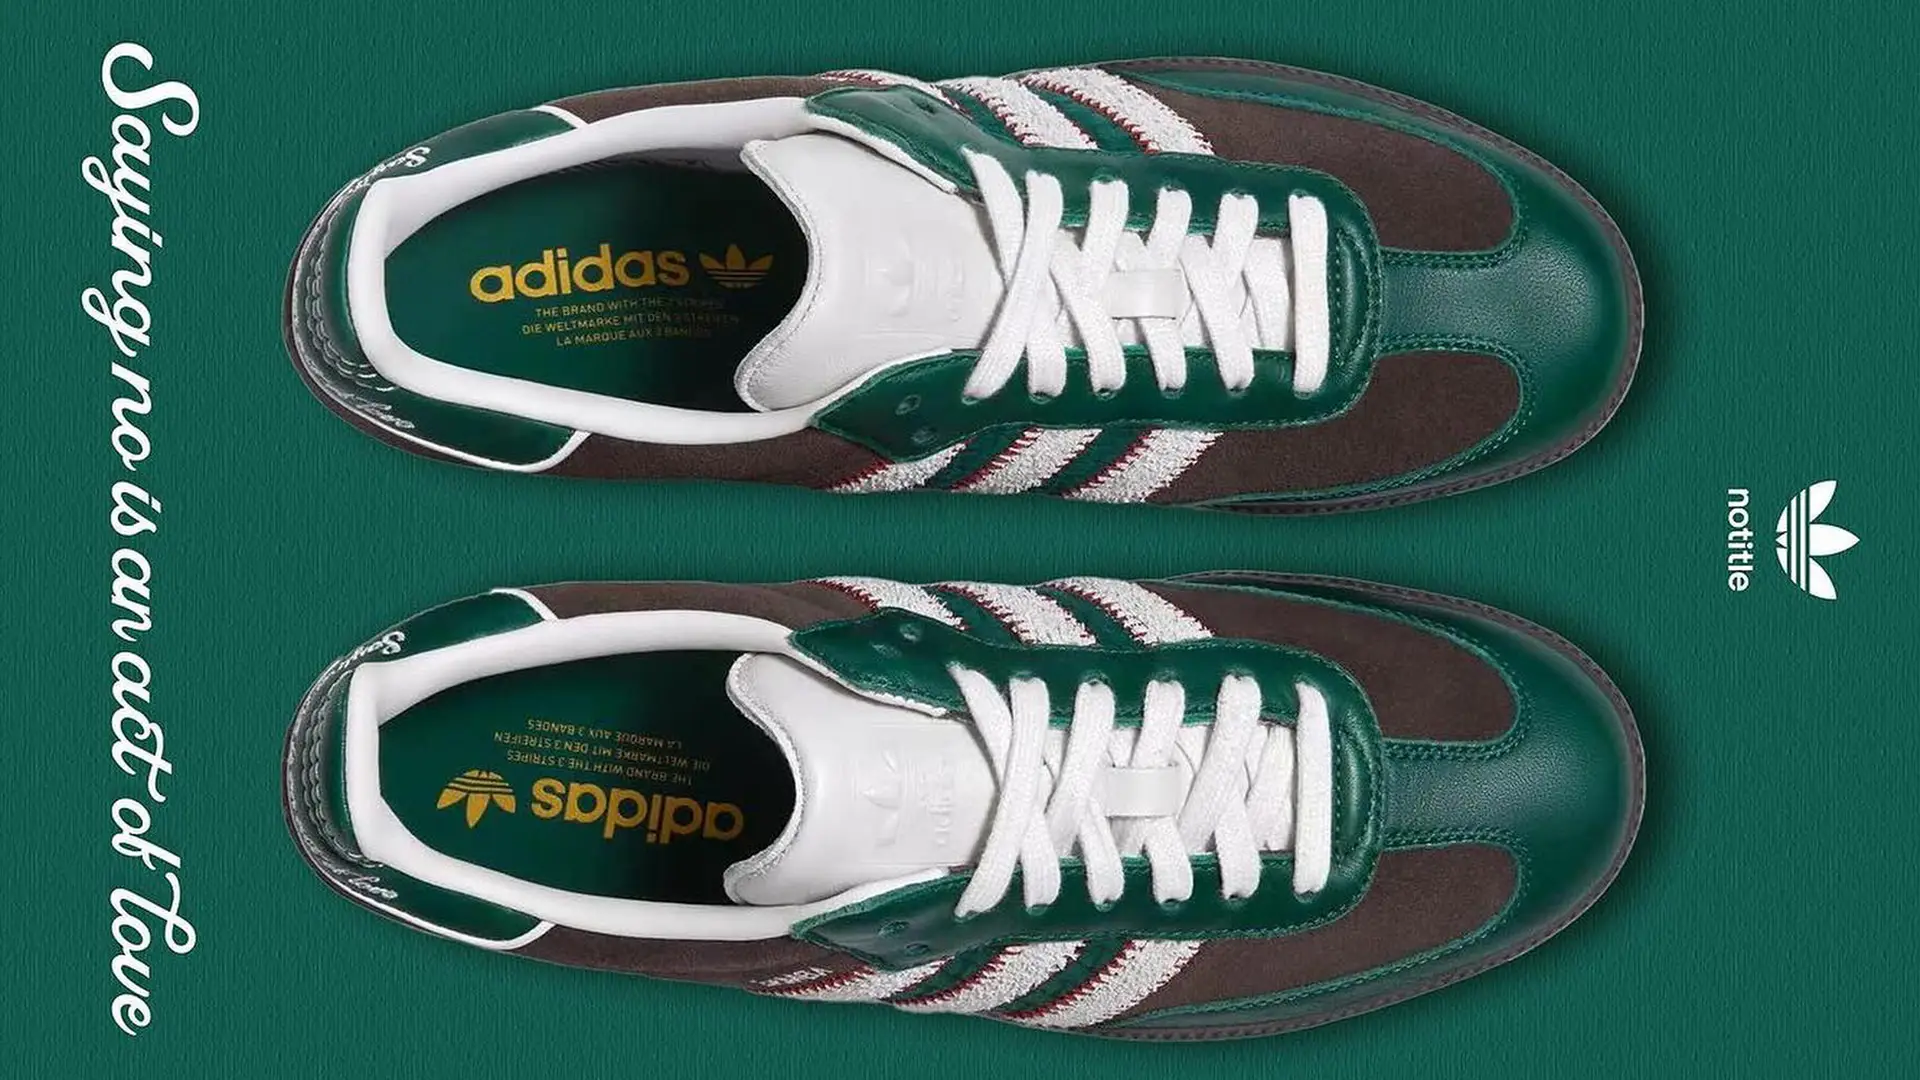 The notitle x adidas Samba Collection May Be Getting a Wider 